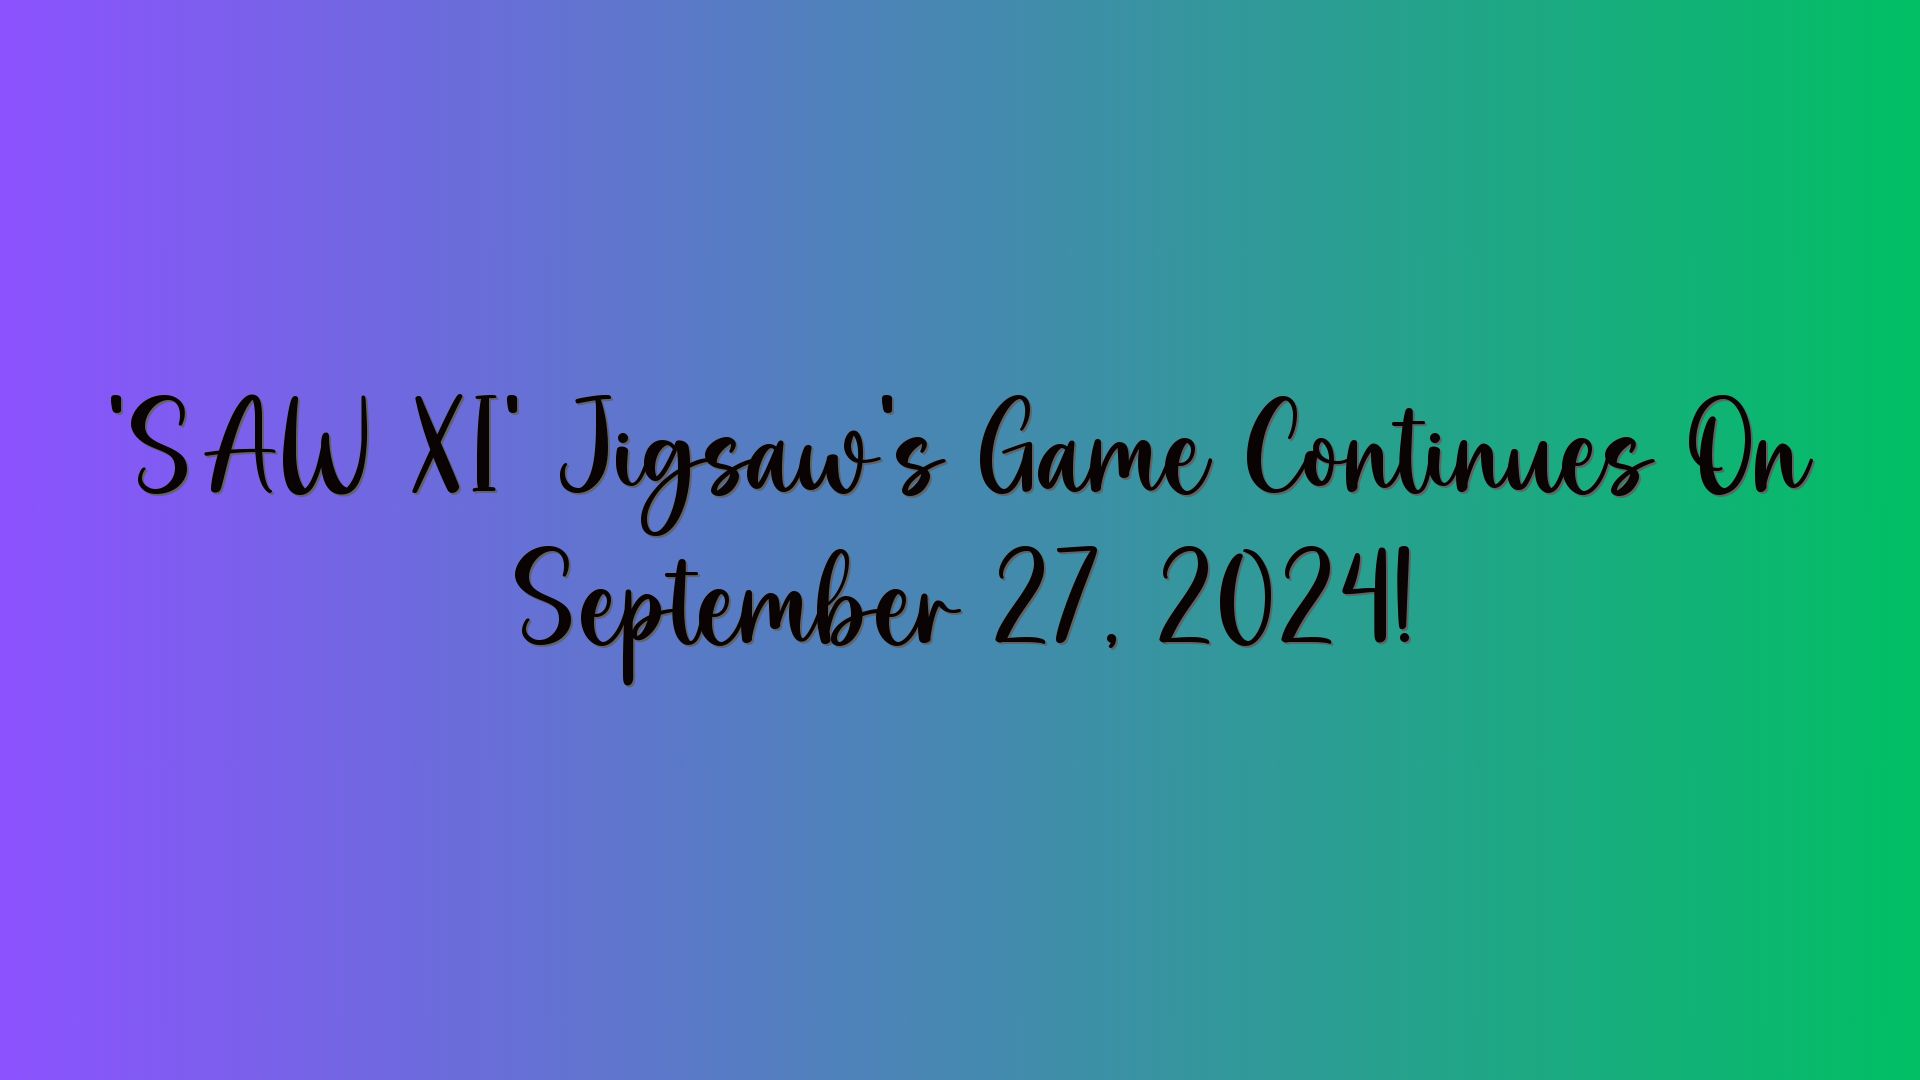 ‘SAW XI’ Jigsaw’s Game Continues On September 27, 2024!